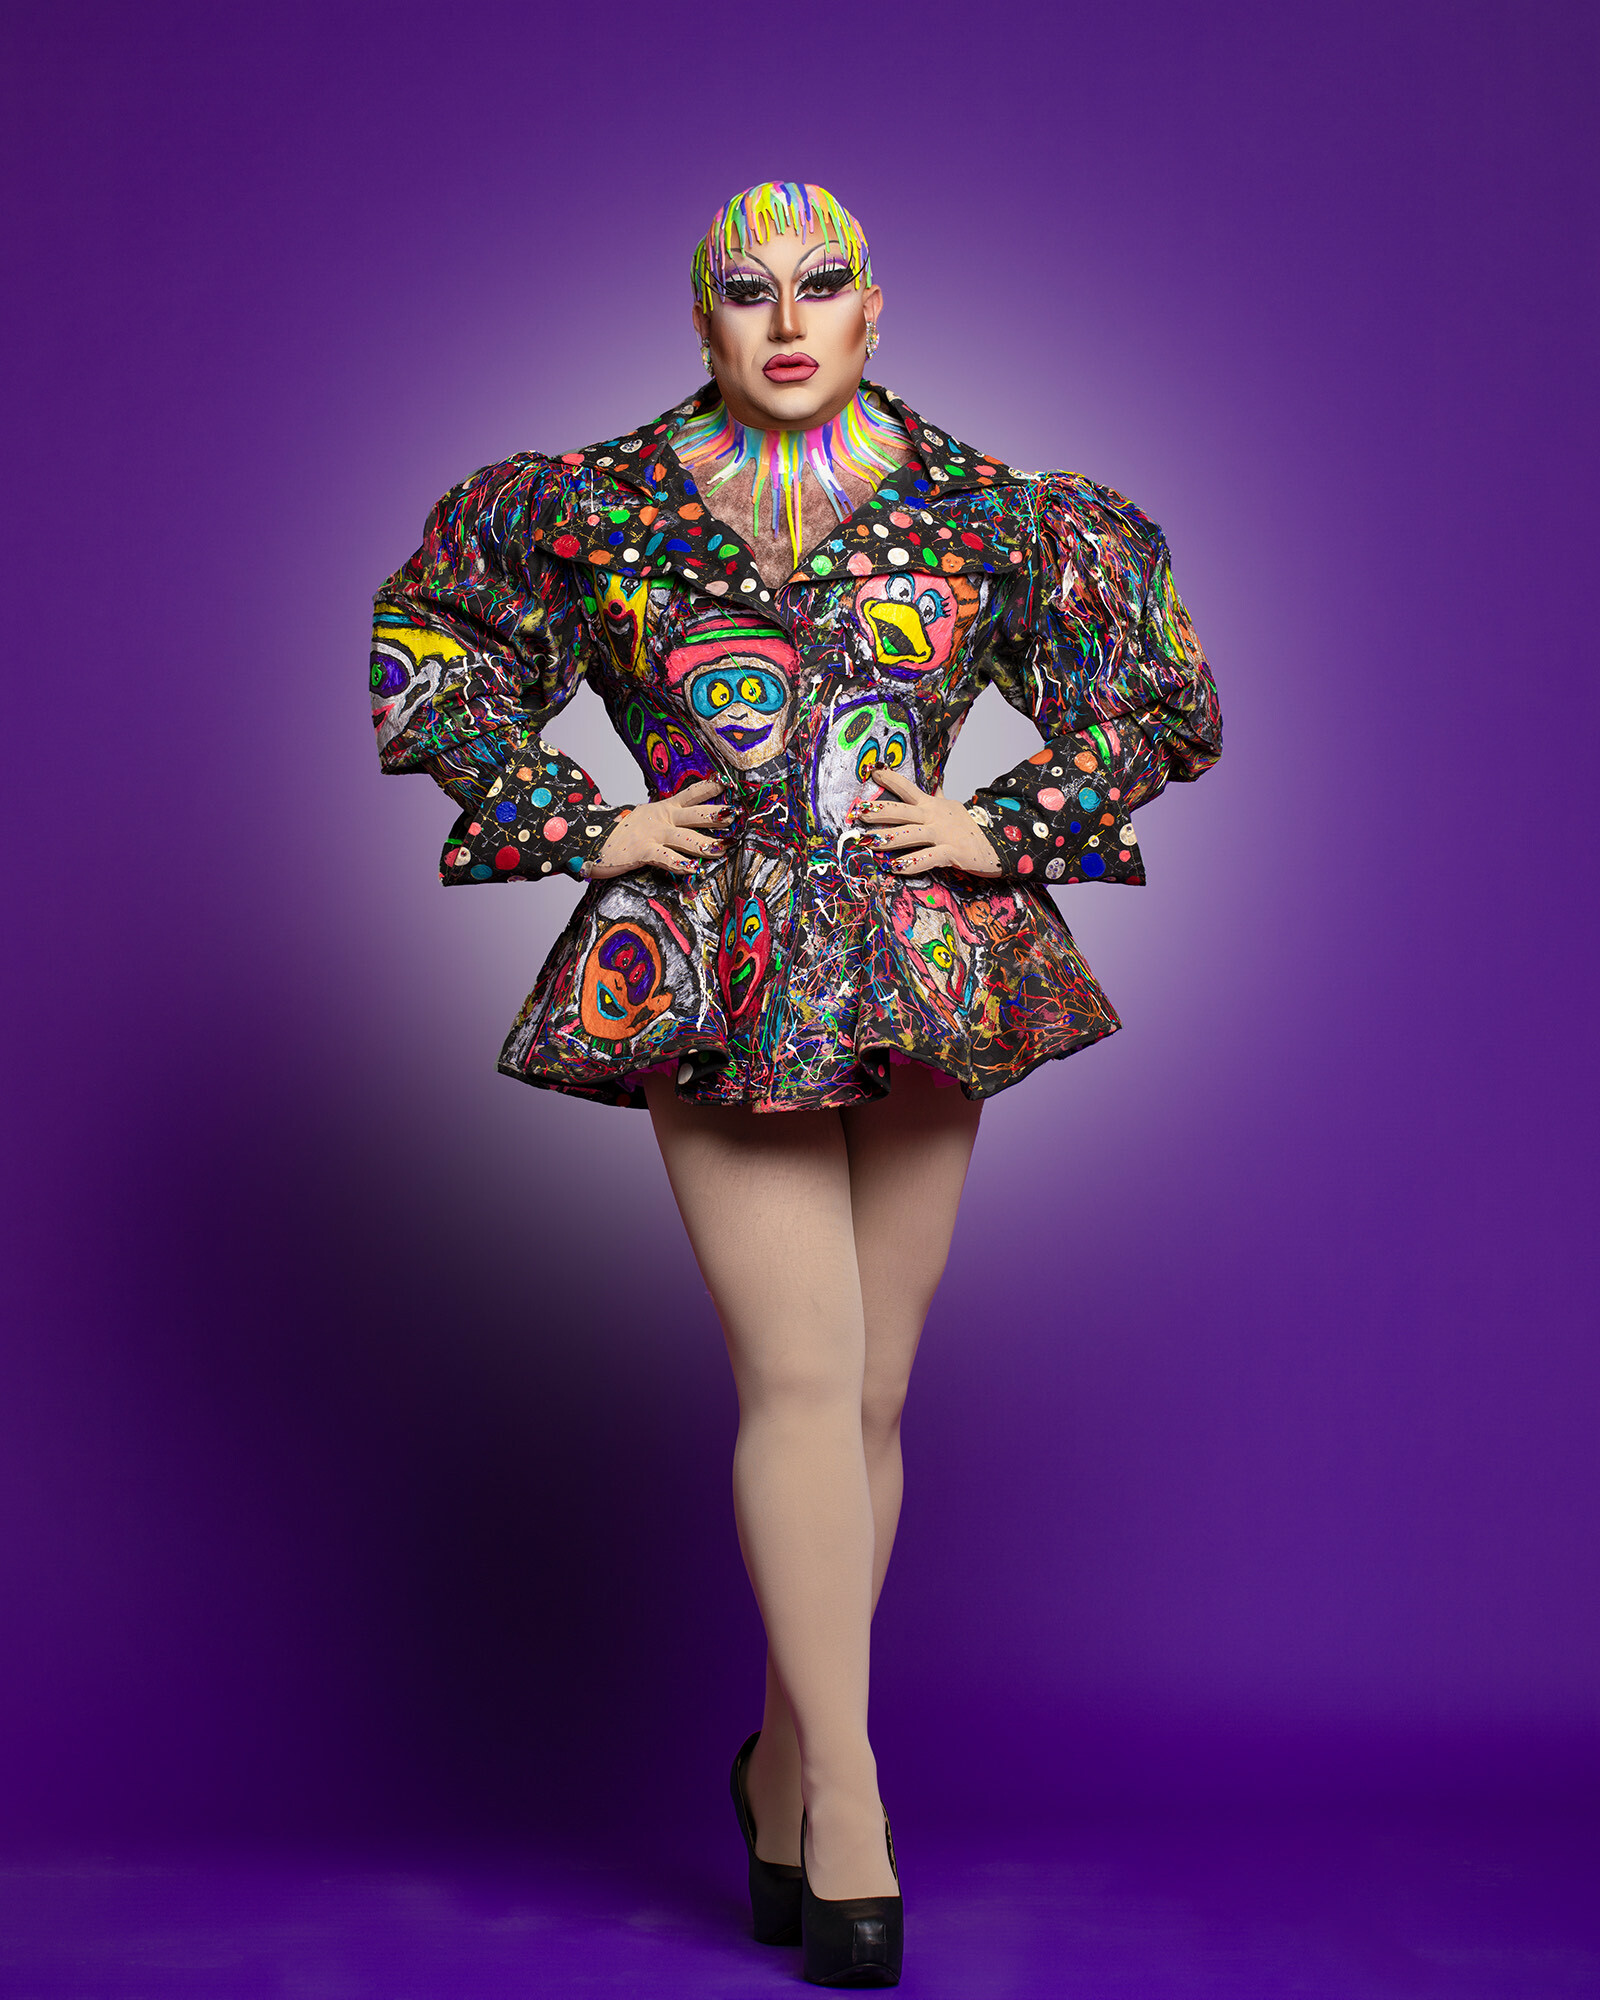 A drag performer in a colorful outfit.